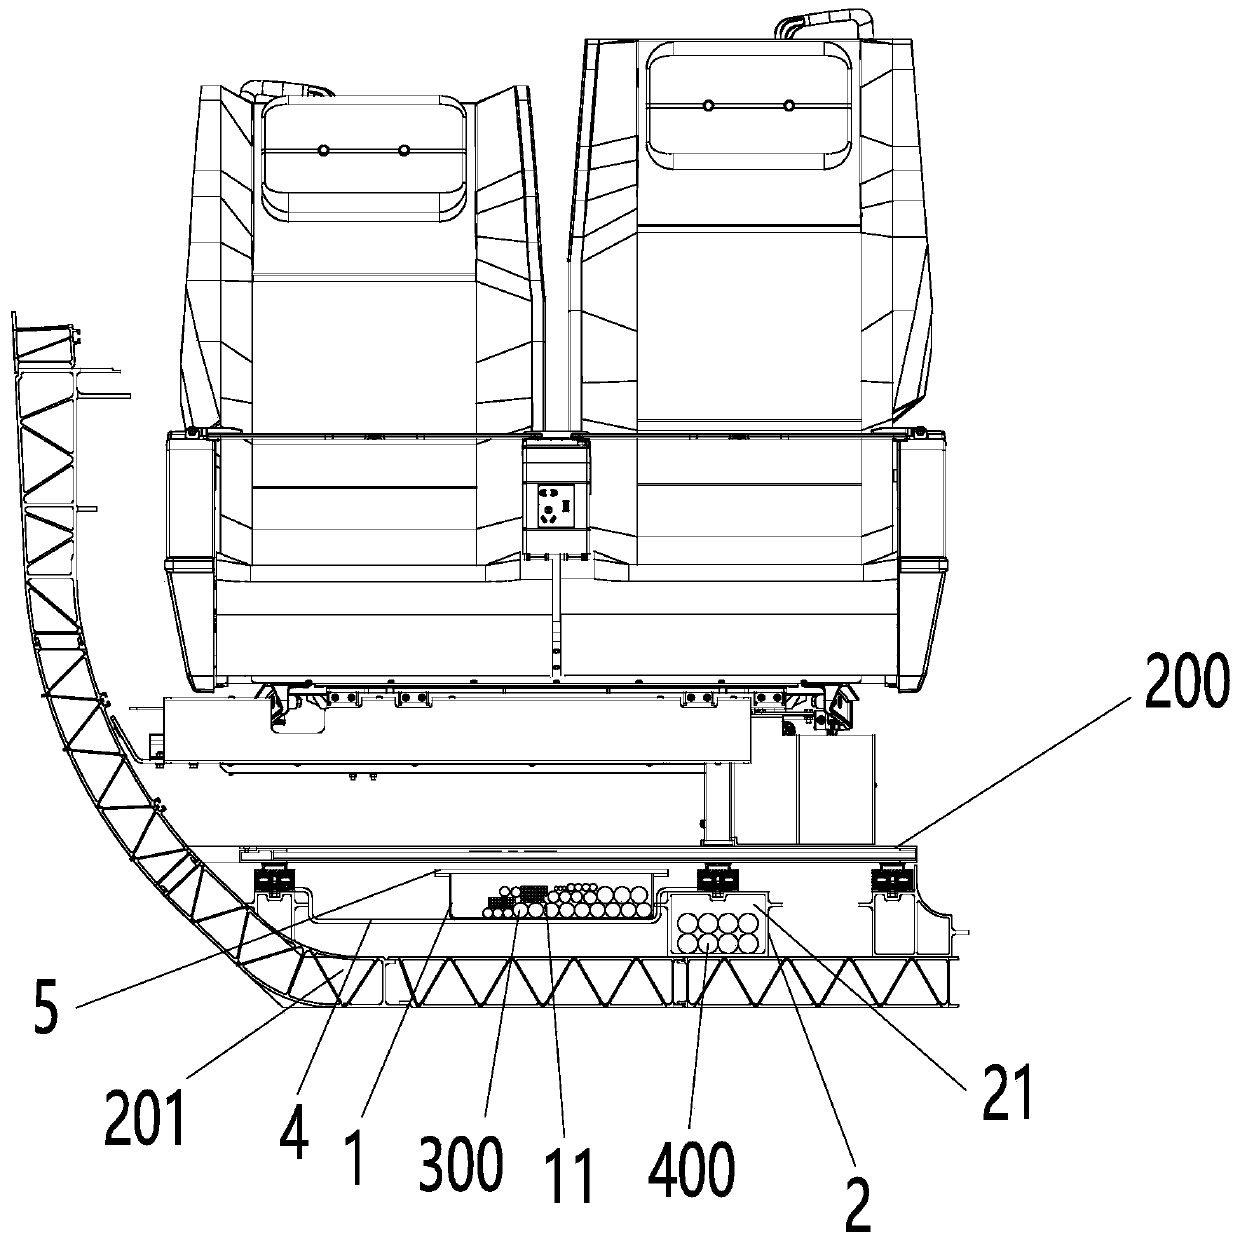 Pipeline layout structure of railway vehicle and railway vehicle with the same